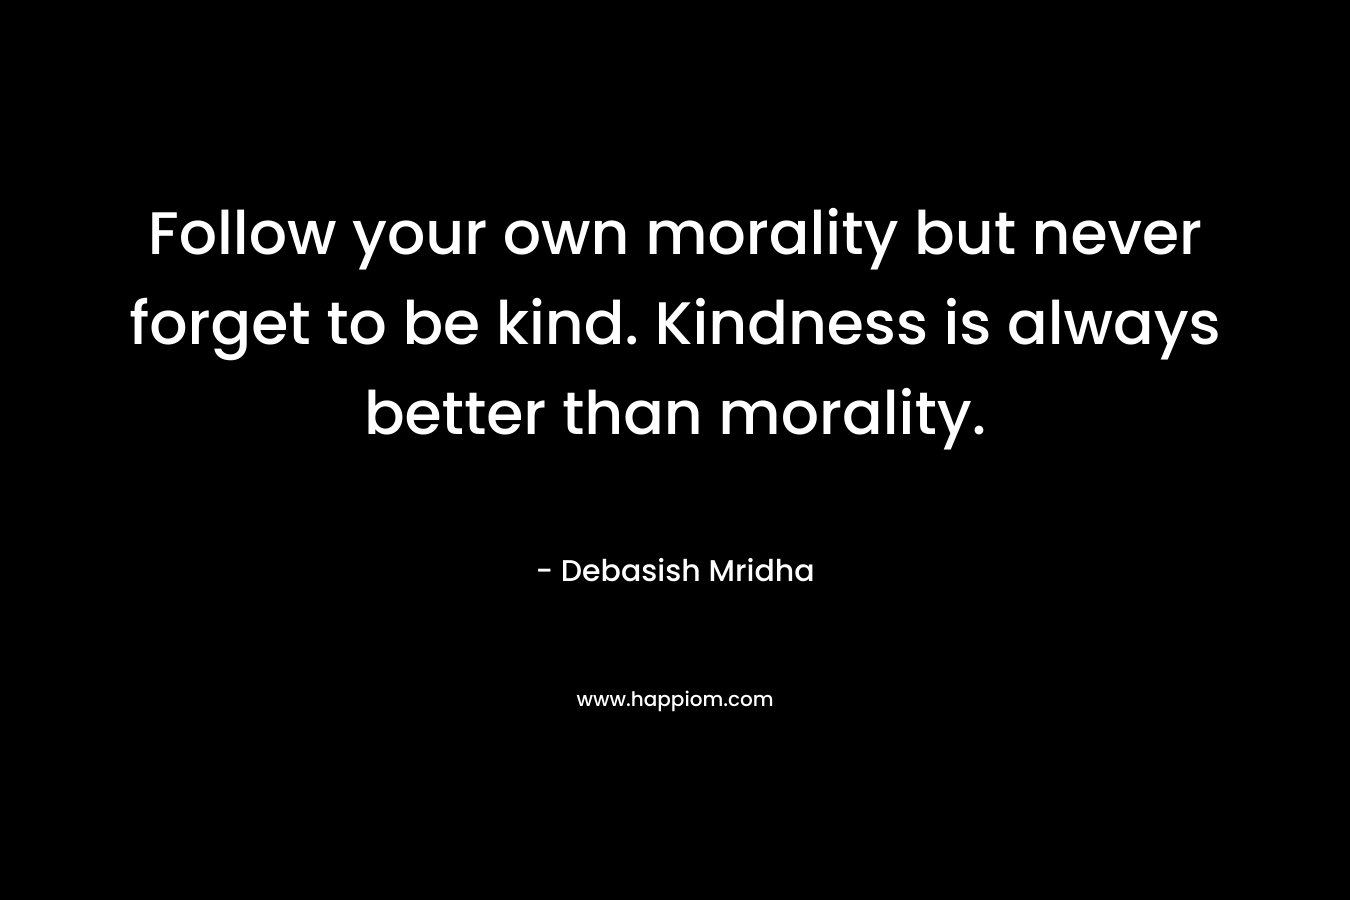 Follow your own morality but never forget to be kind. Kindness is always better than morality.